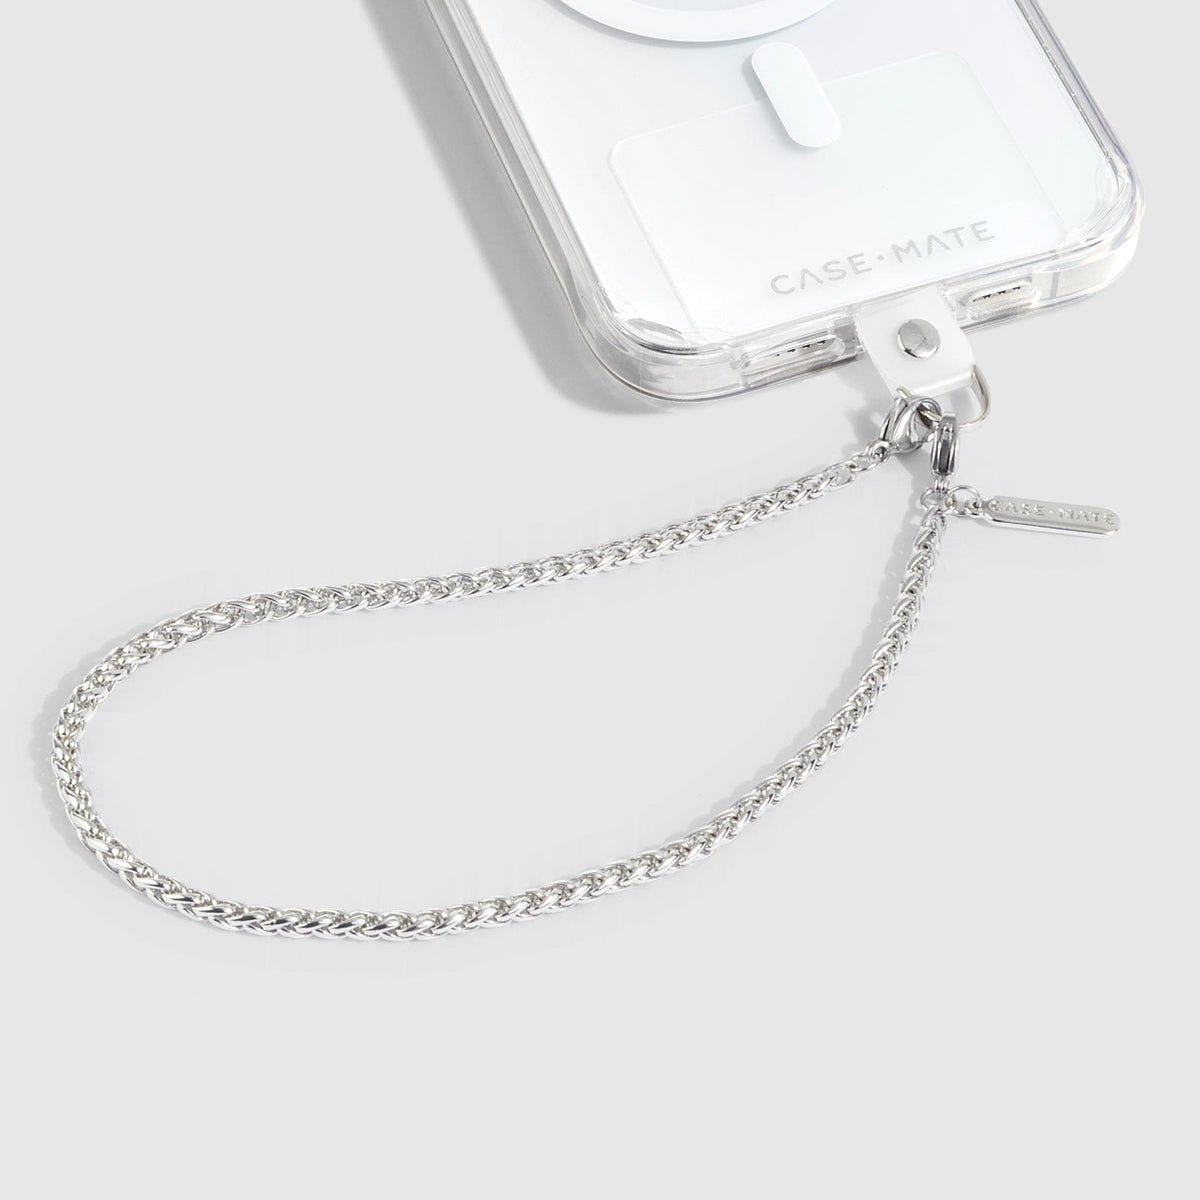 Case-Mate Phone Strap Beaded Wristlet - Dainty Silver Chain